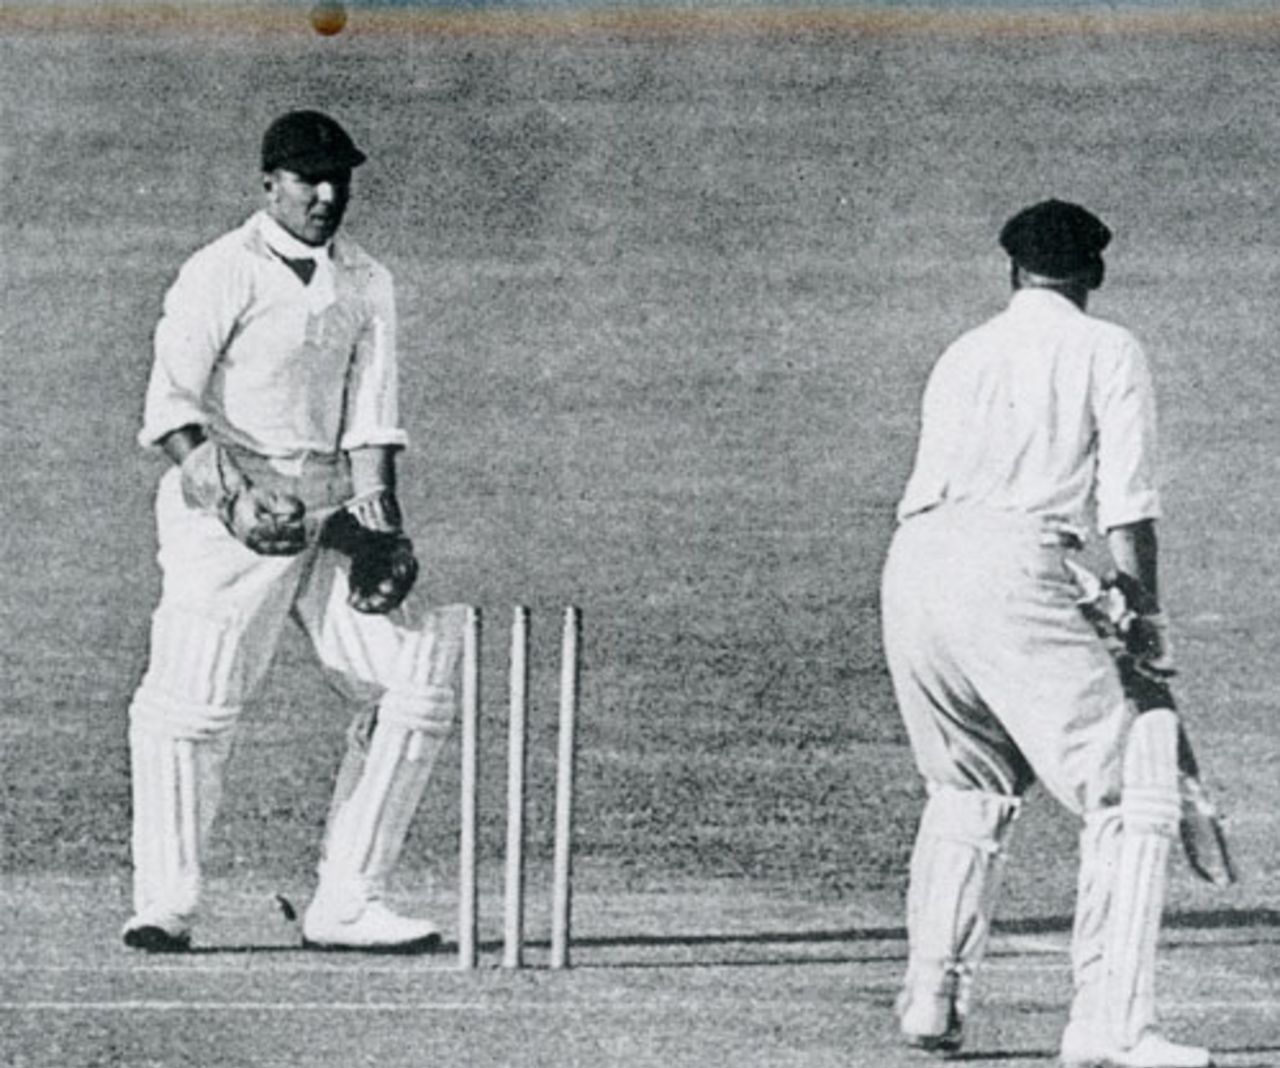 Bill Woodfull is bowled by Tommy Mitchell as Les Ames looks on, Australia v England, 4th Test, Brisbane, February 10, 1933